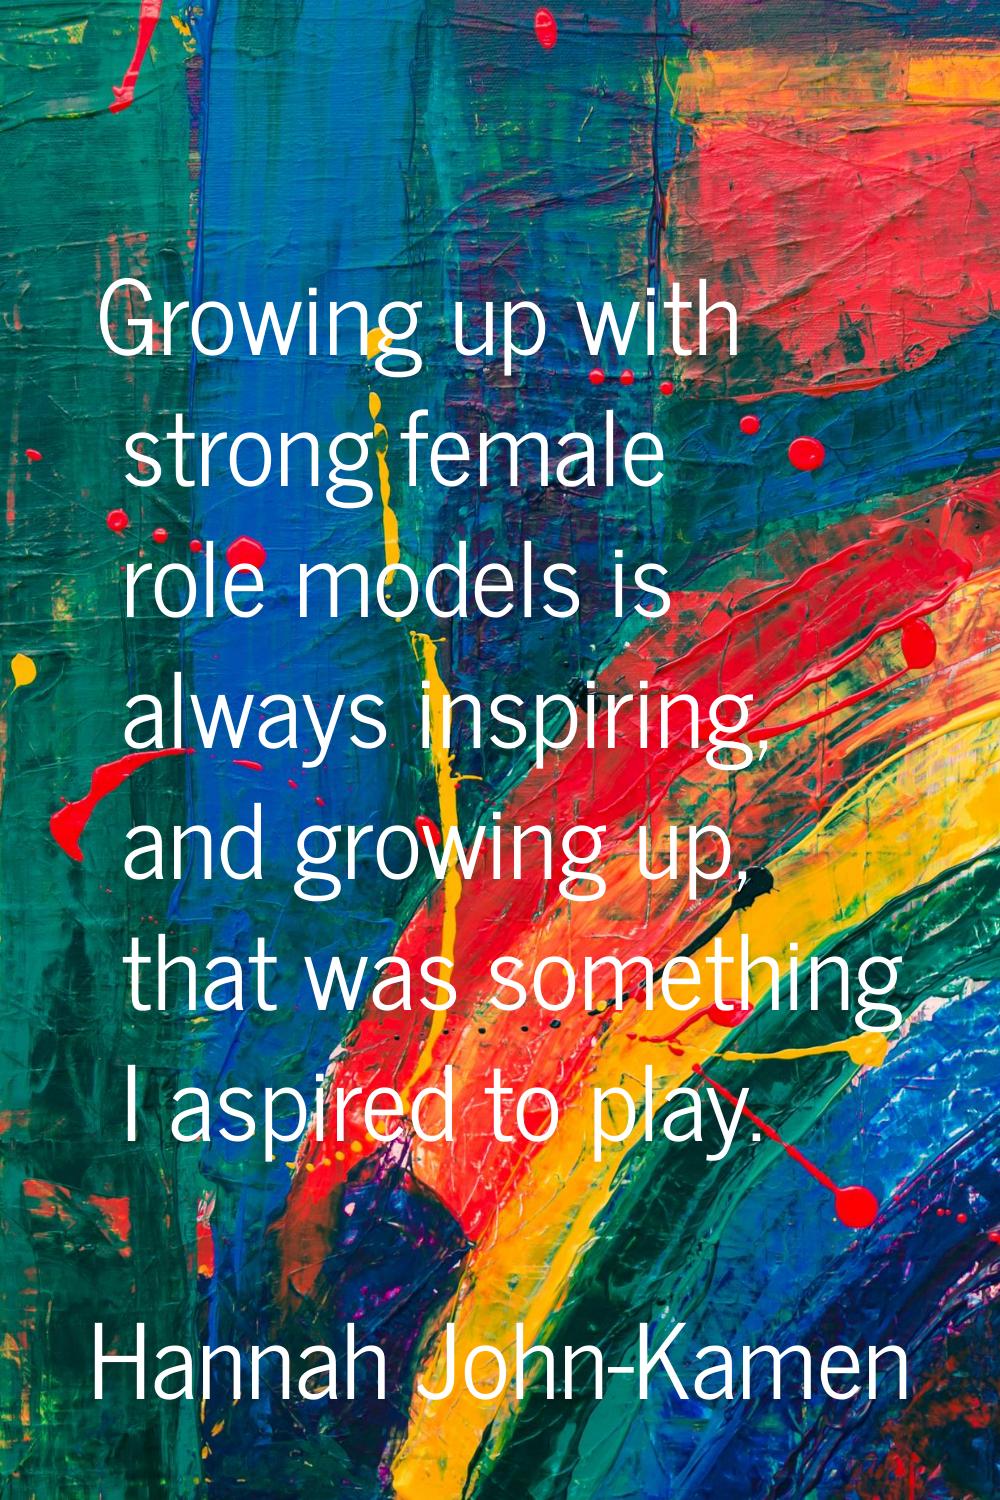 Growing up with strong female role models is always inspiring, and growing up, that was something I